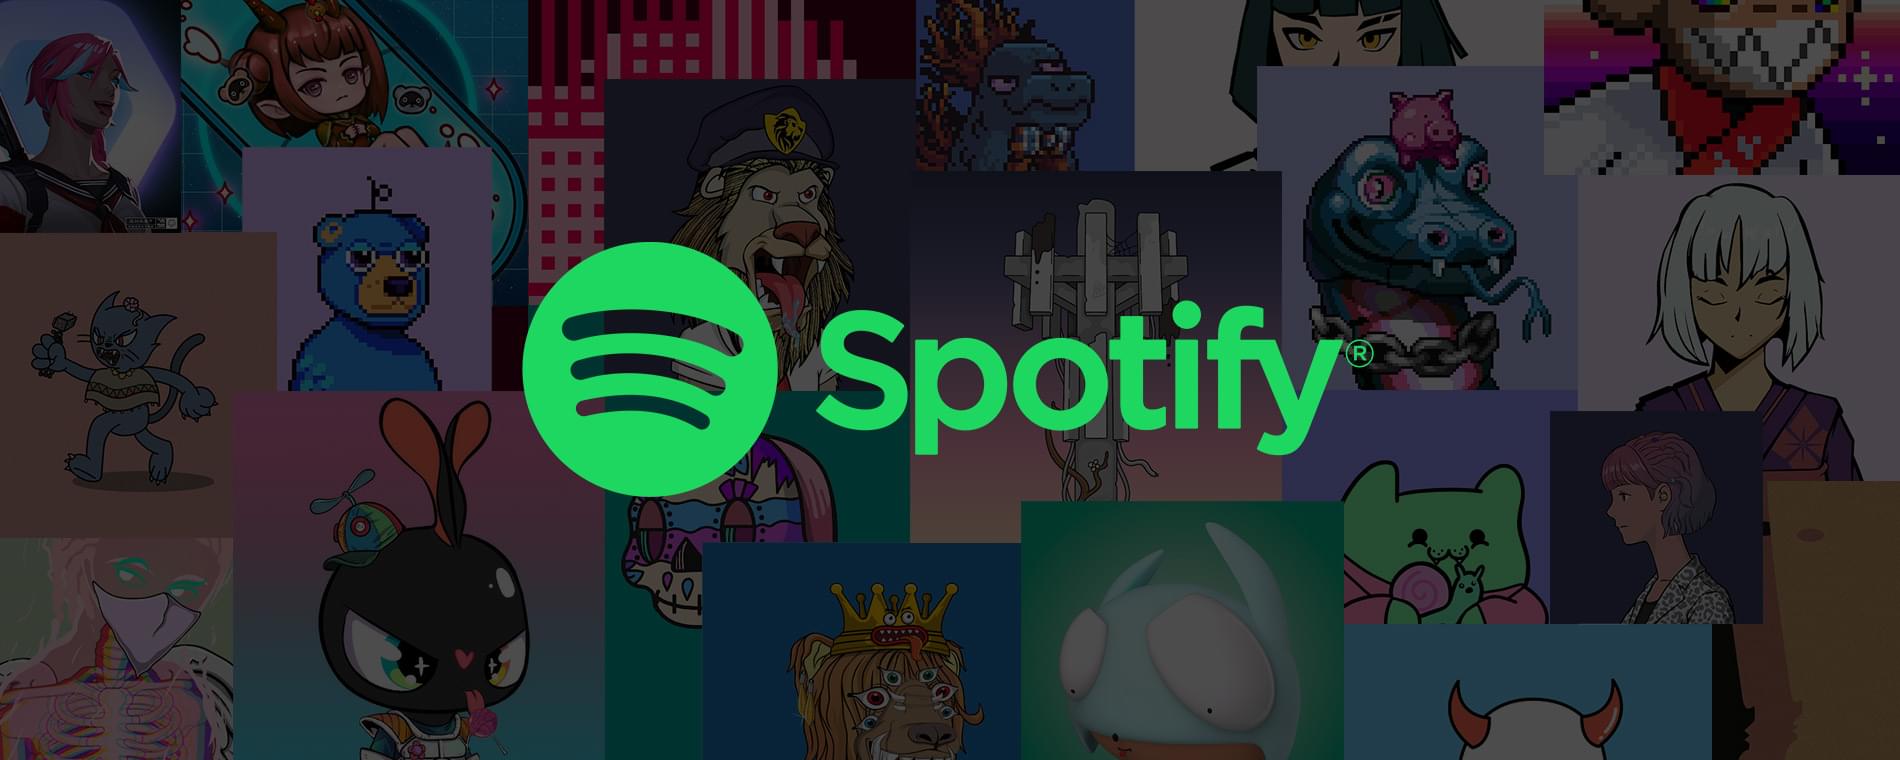 Spotify experimenting with NFTs